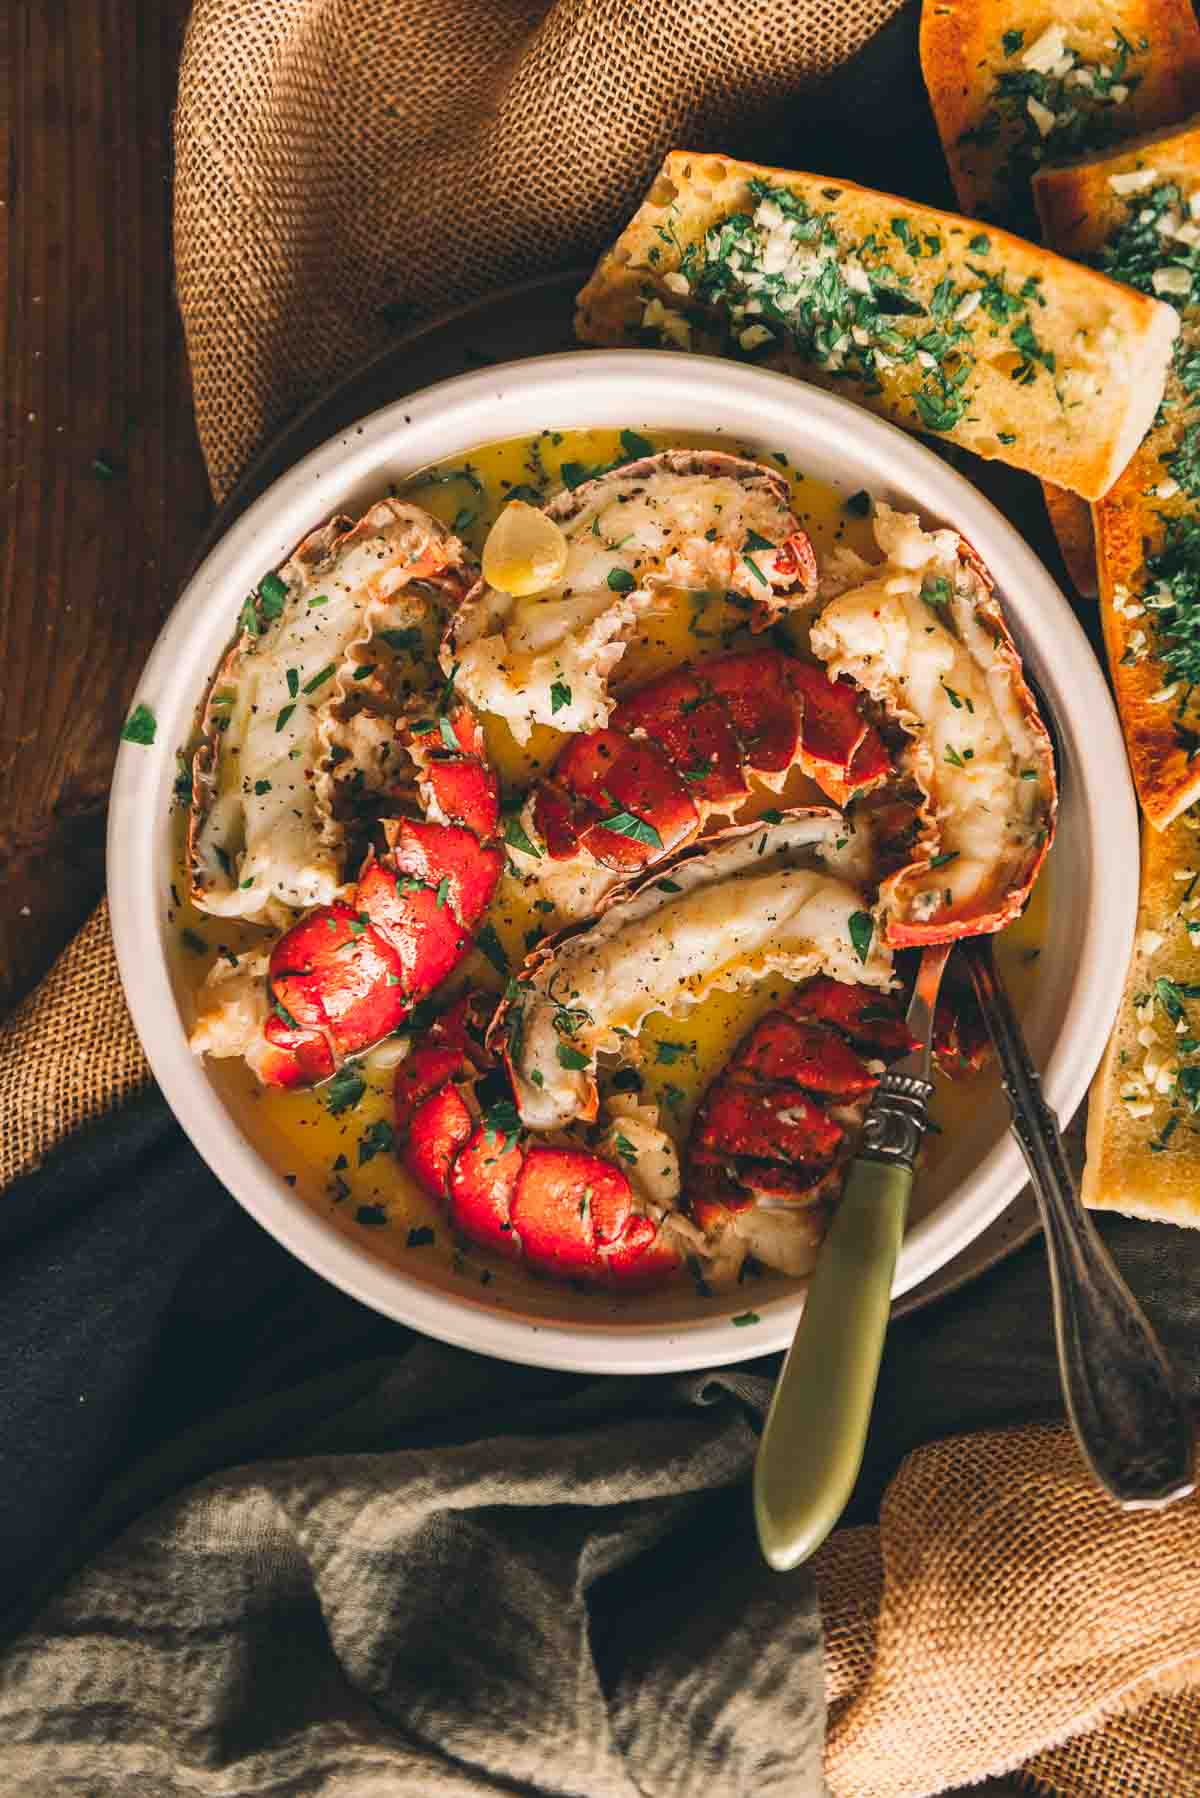 Bright red lobster shells and cooked lobster meat in a bowl of butter, garlic and herbs.